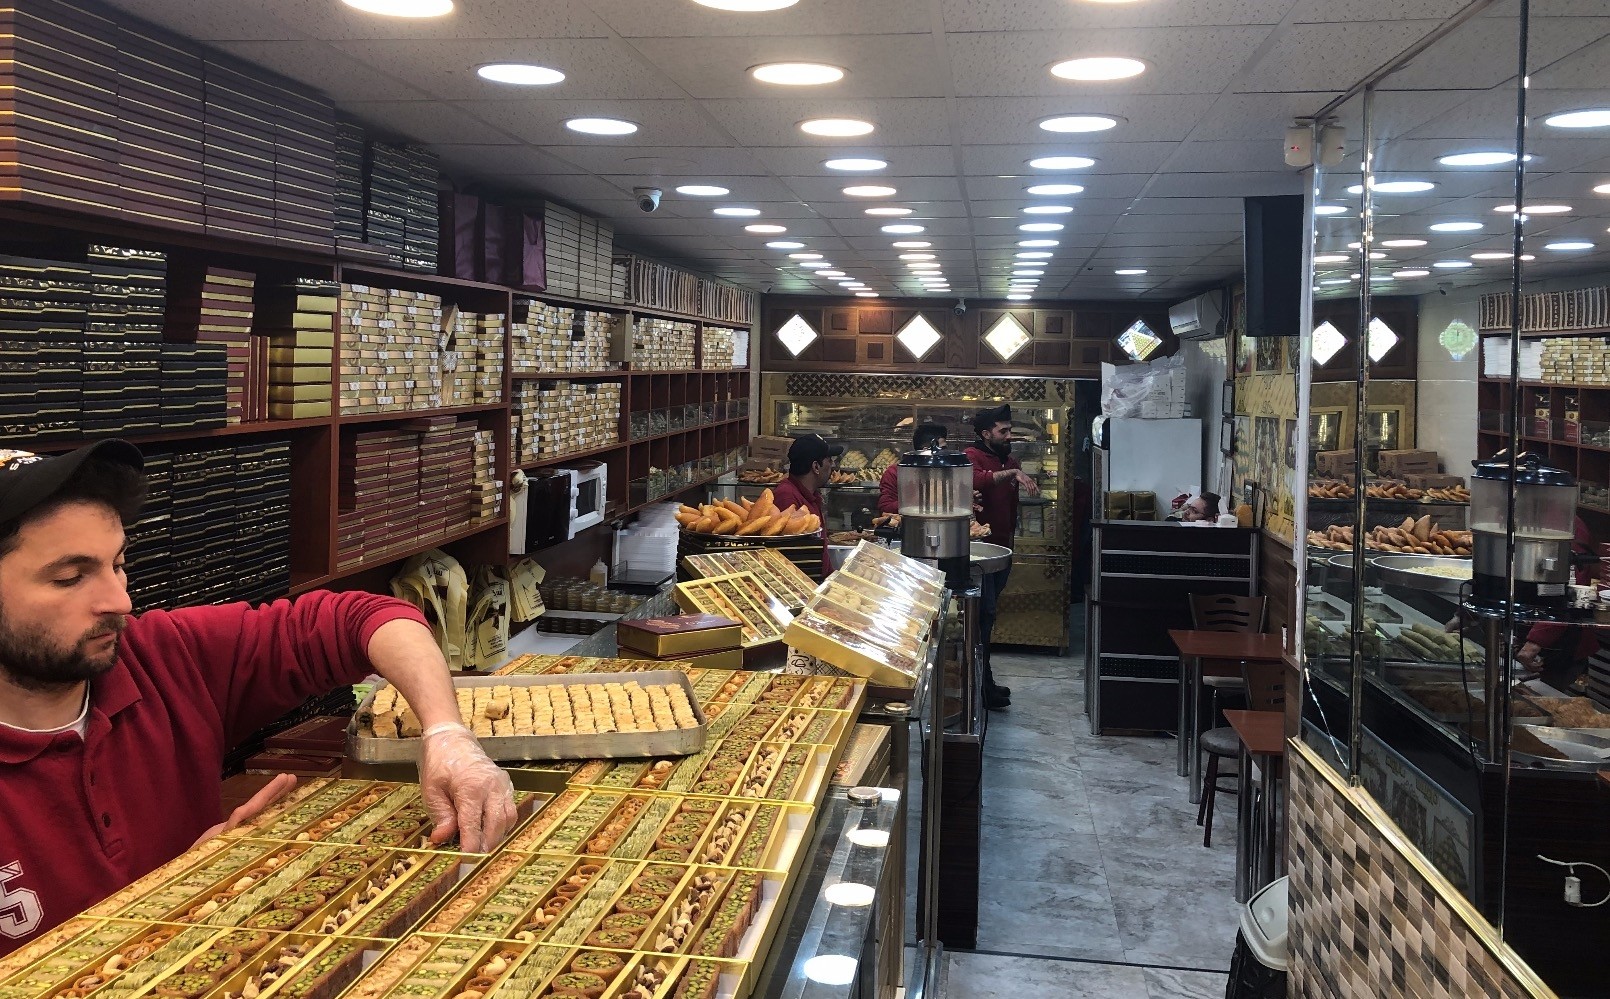 A shop that sells traditional Syrian desserts in Aksaray, a neigborhood in the Fatih district of Istanbul with high numbers of stores owned by Syrian entrepreneurs.